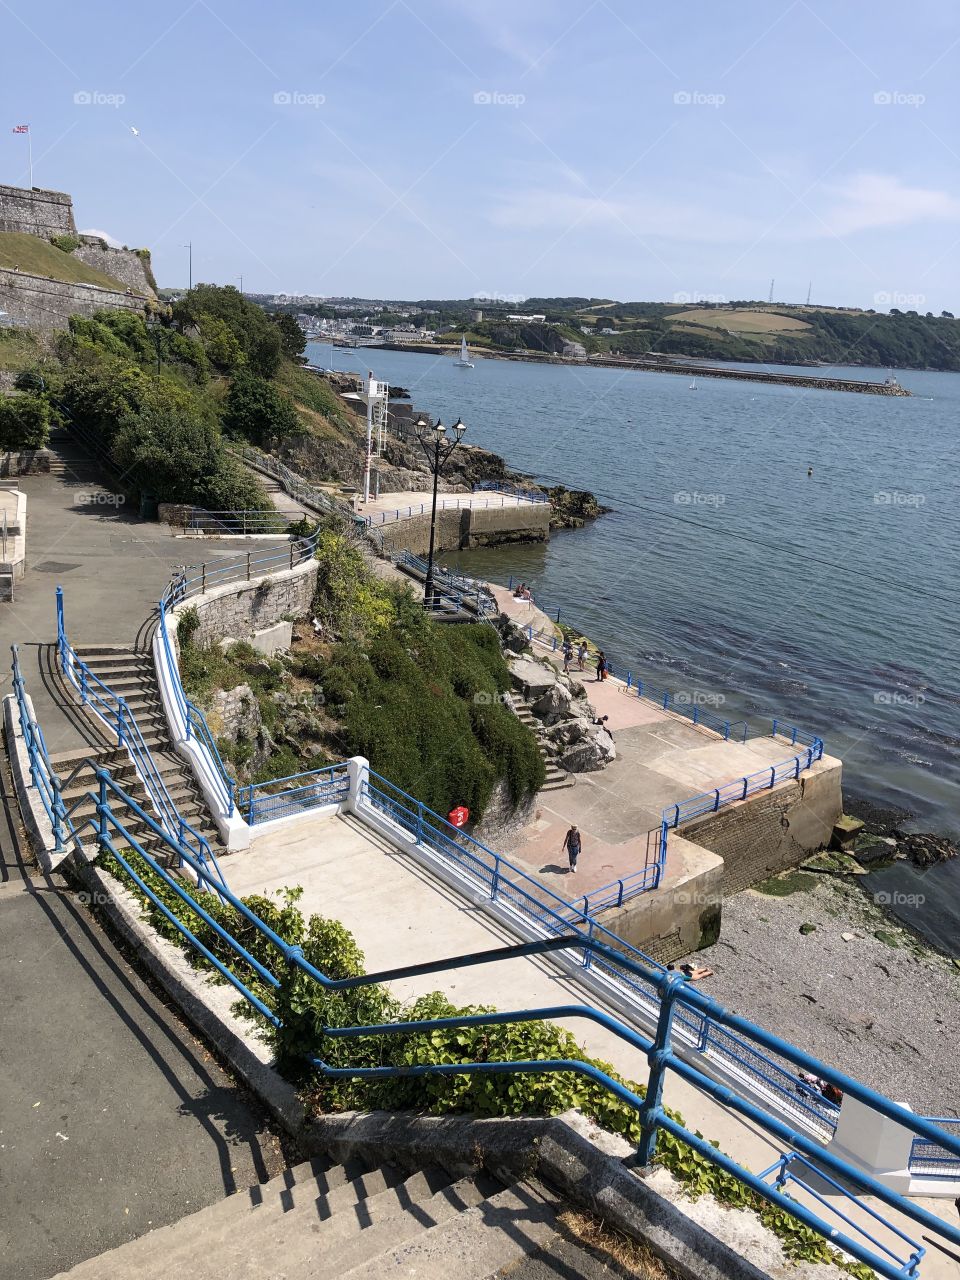 A coastal view of the sumptuous Plymouth Hoe on a beautiful sunny day in July 2019.